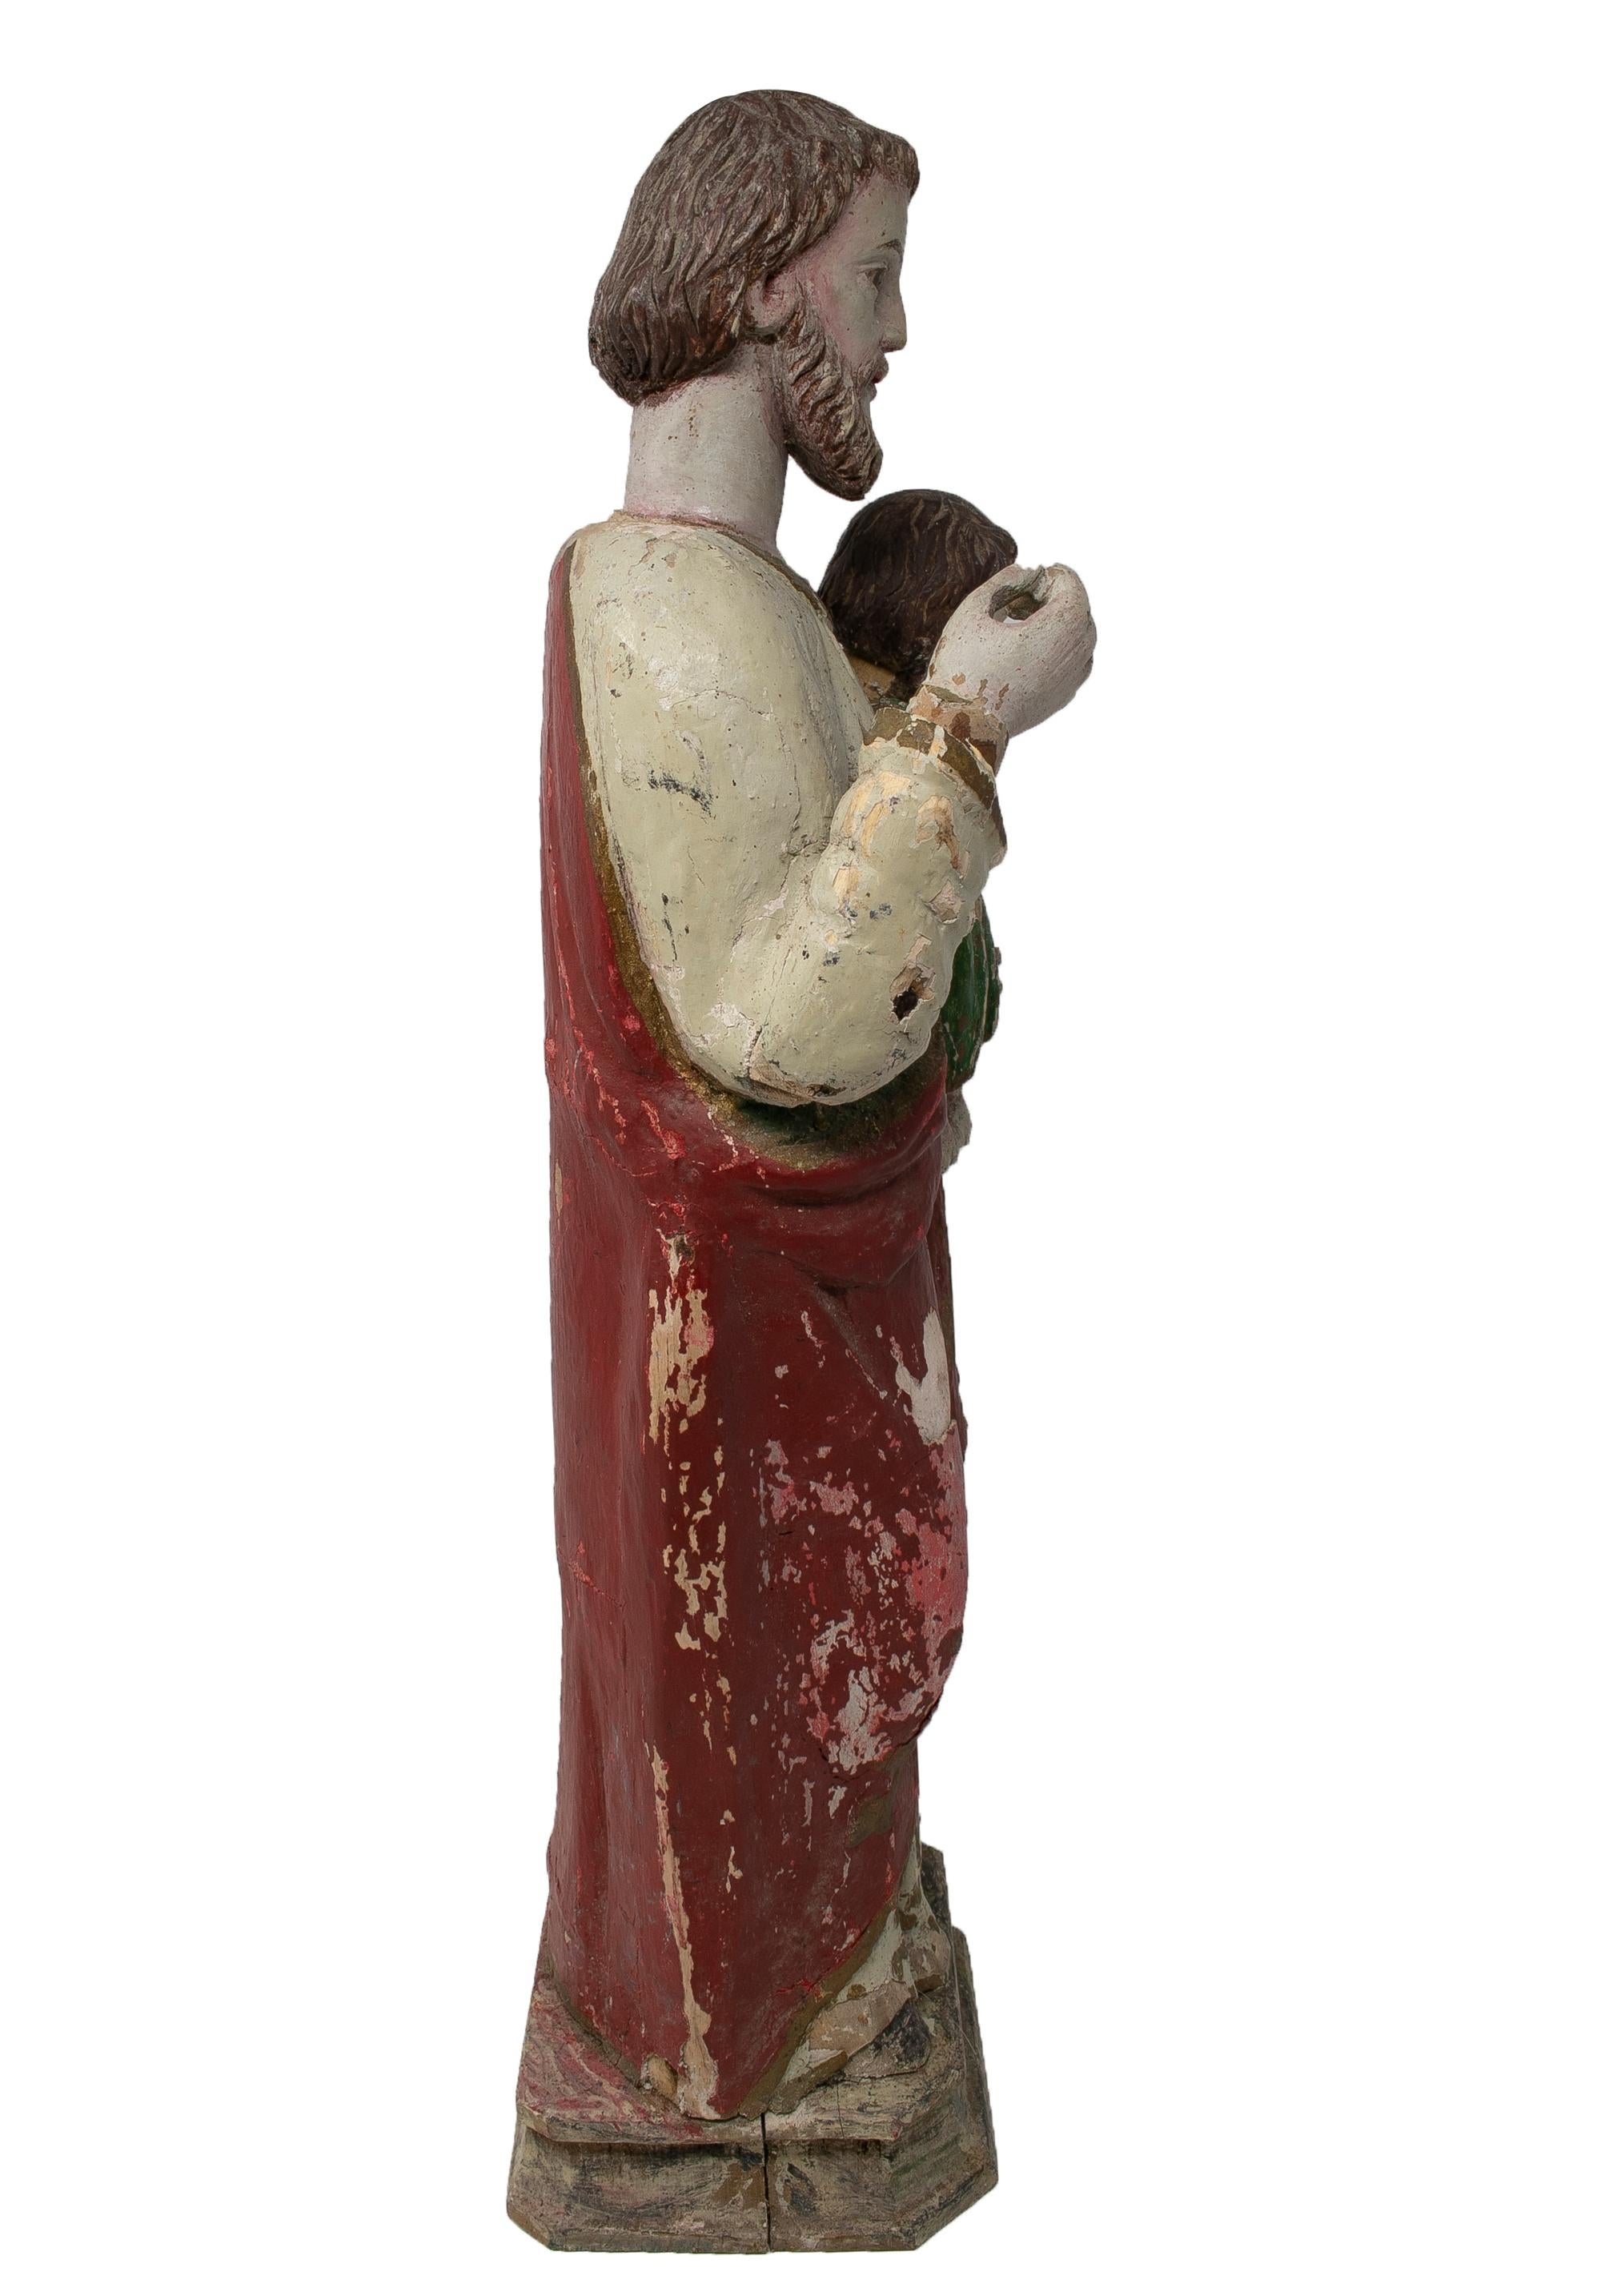 Mid-19th Century Spanish Saint Painted Wooden Figurative Sculpture For Sale 3